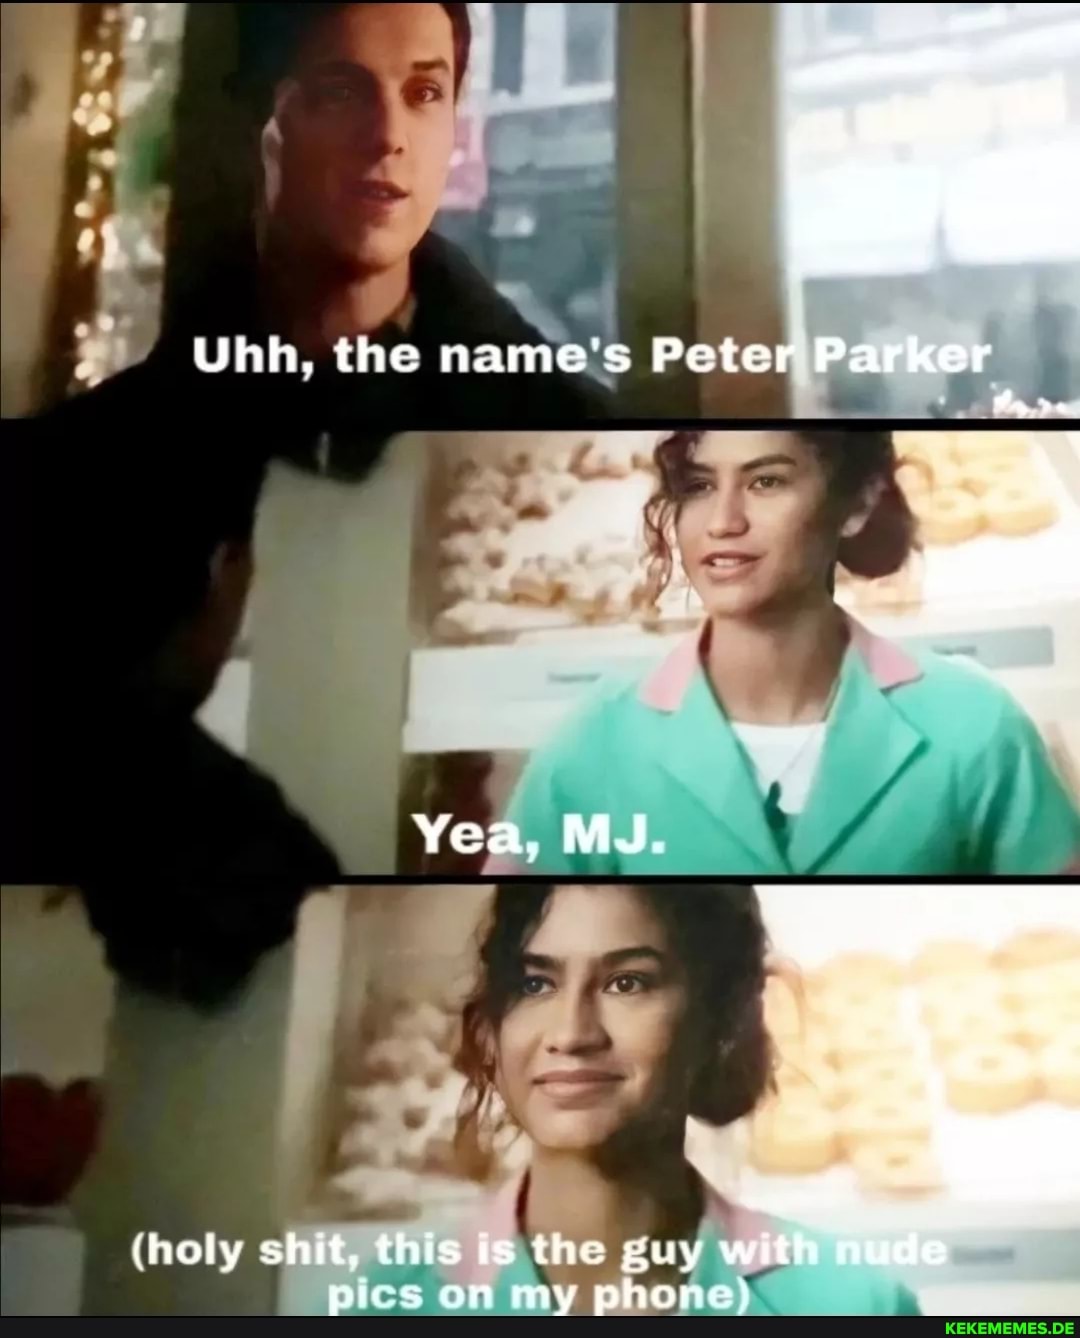 DO Uhh, the name's Peter Parker Yea, MJ. (holy shit, this ts the guy with nude p